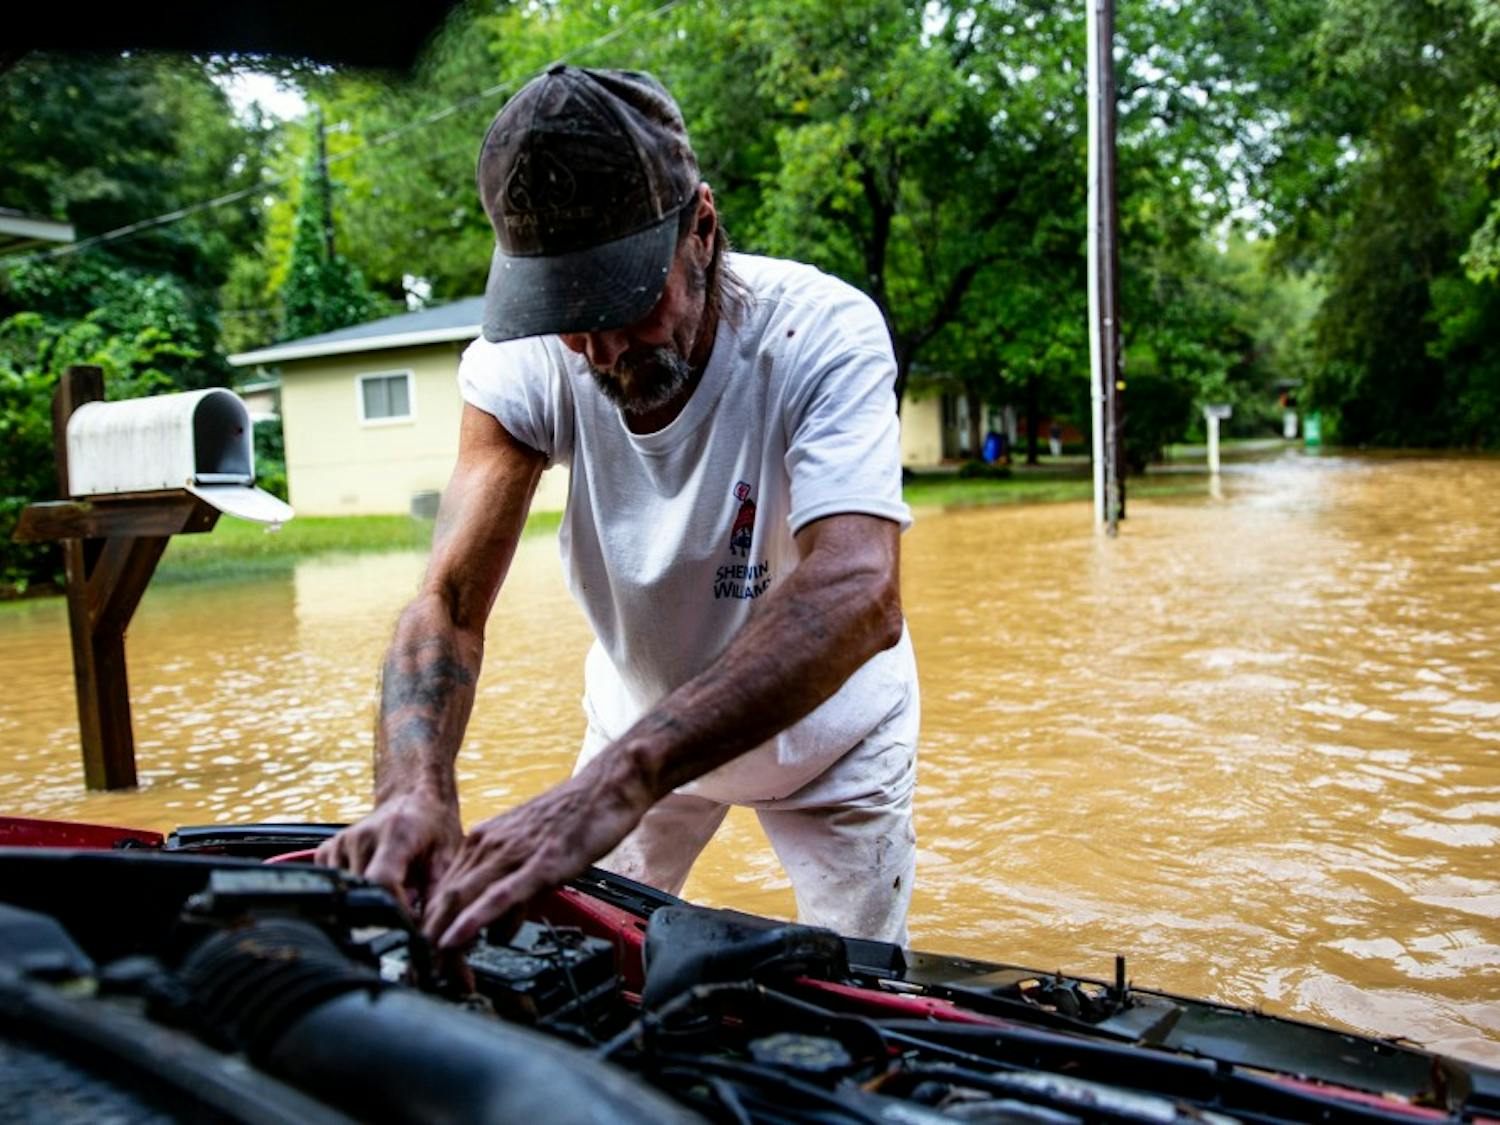 James Allen evacuated Jacksonville, NC ahead of Hurricane Florence in an effort to save what he could from the storm. He has spent the week at his friend's house in Chapel Hill and thought he had least spared his newly purchased car from the storm, knowing his home was likely destroyed. "That car is my lifeline. I work all over the state and need that car to pay my bills," Allen said. The neighborhood resting on a creek is subject to flooding but had been spared until the morning of September 17, 2018 when a sudden downpour of heavy rain forced creeks to crest in Chapel Hill around University Place.